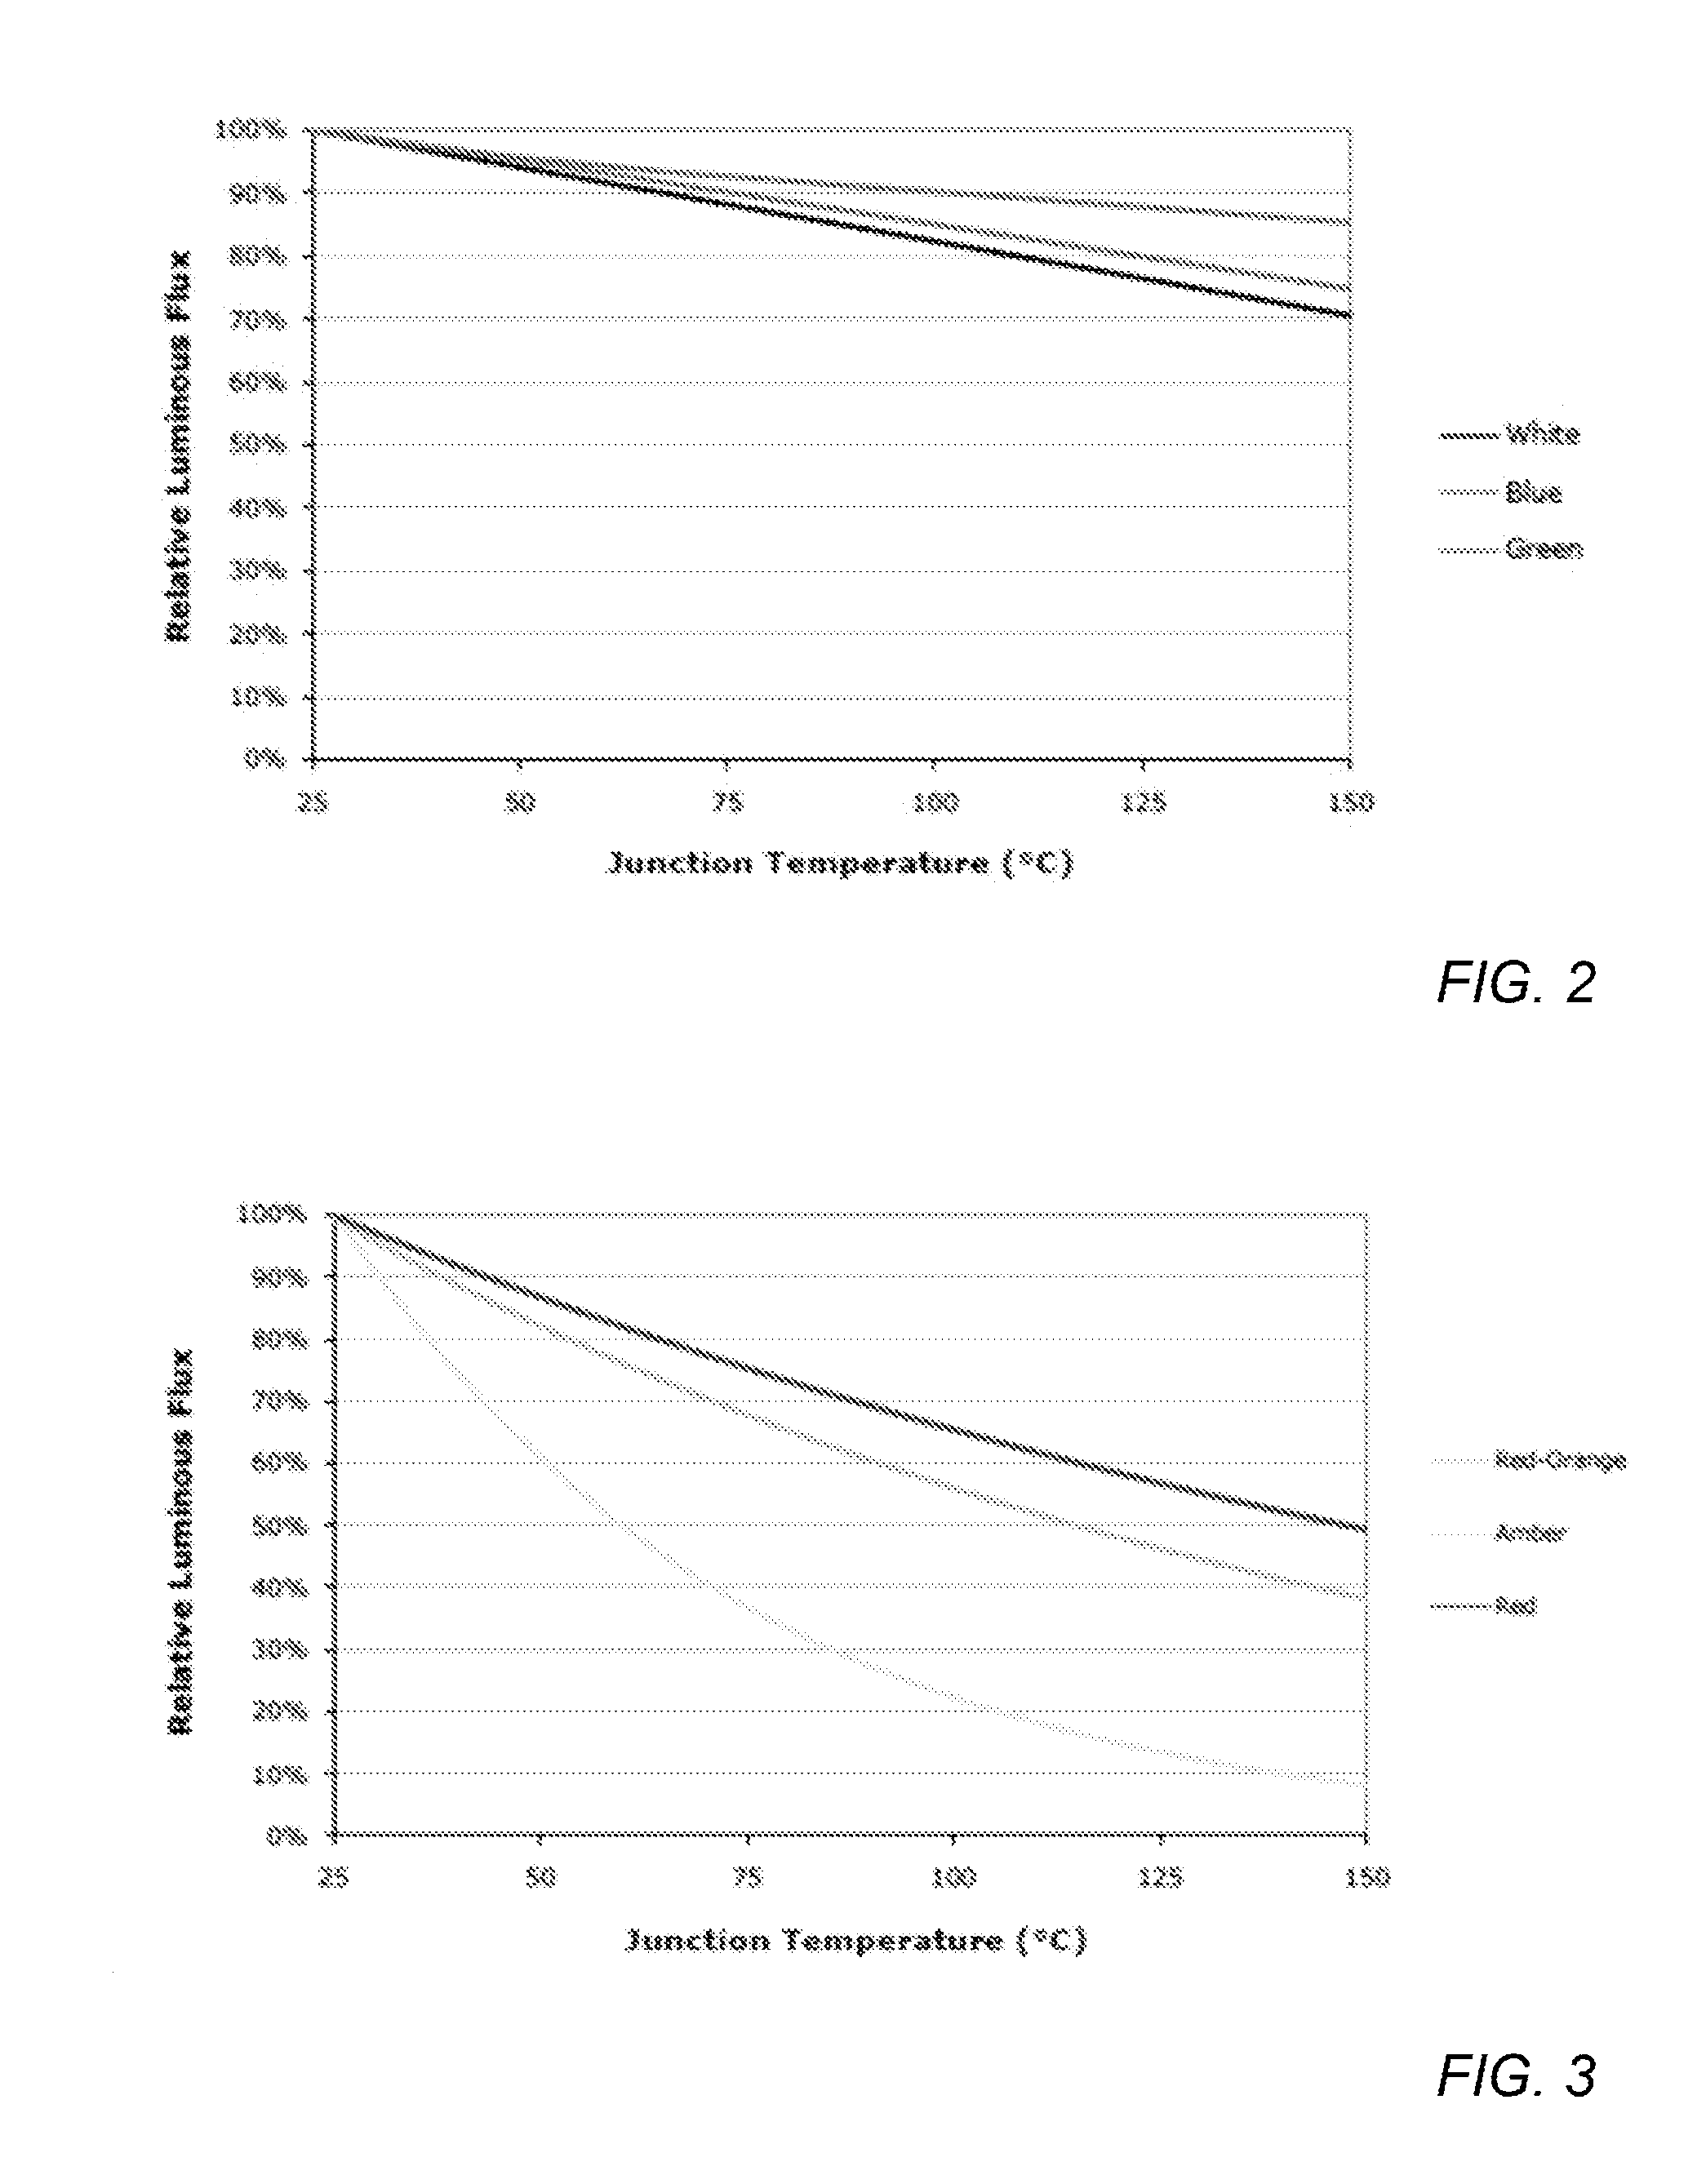 Illumination device and method for controlling an illumination device over changes in drive current and temperature